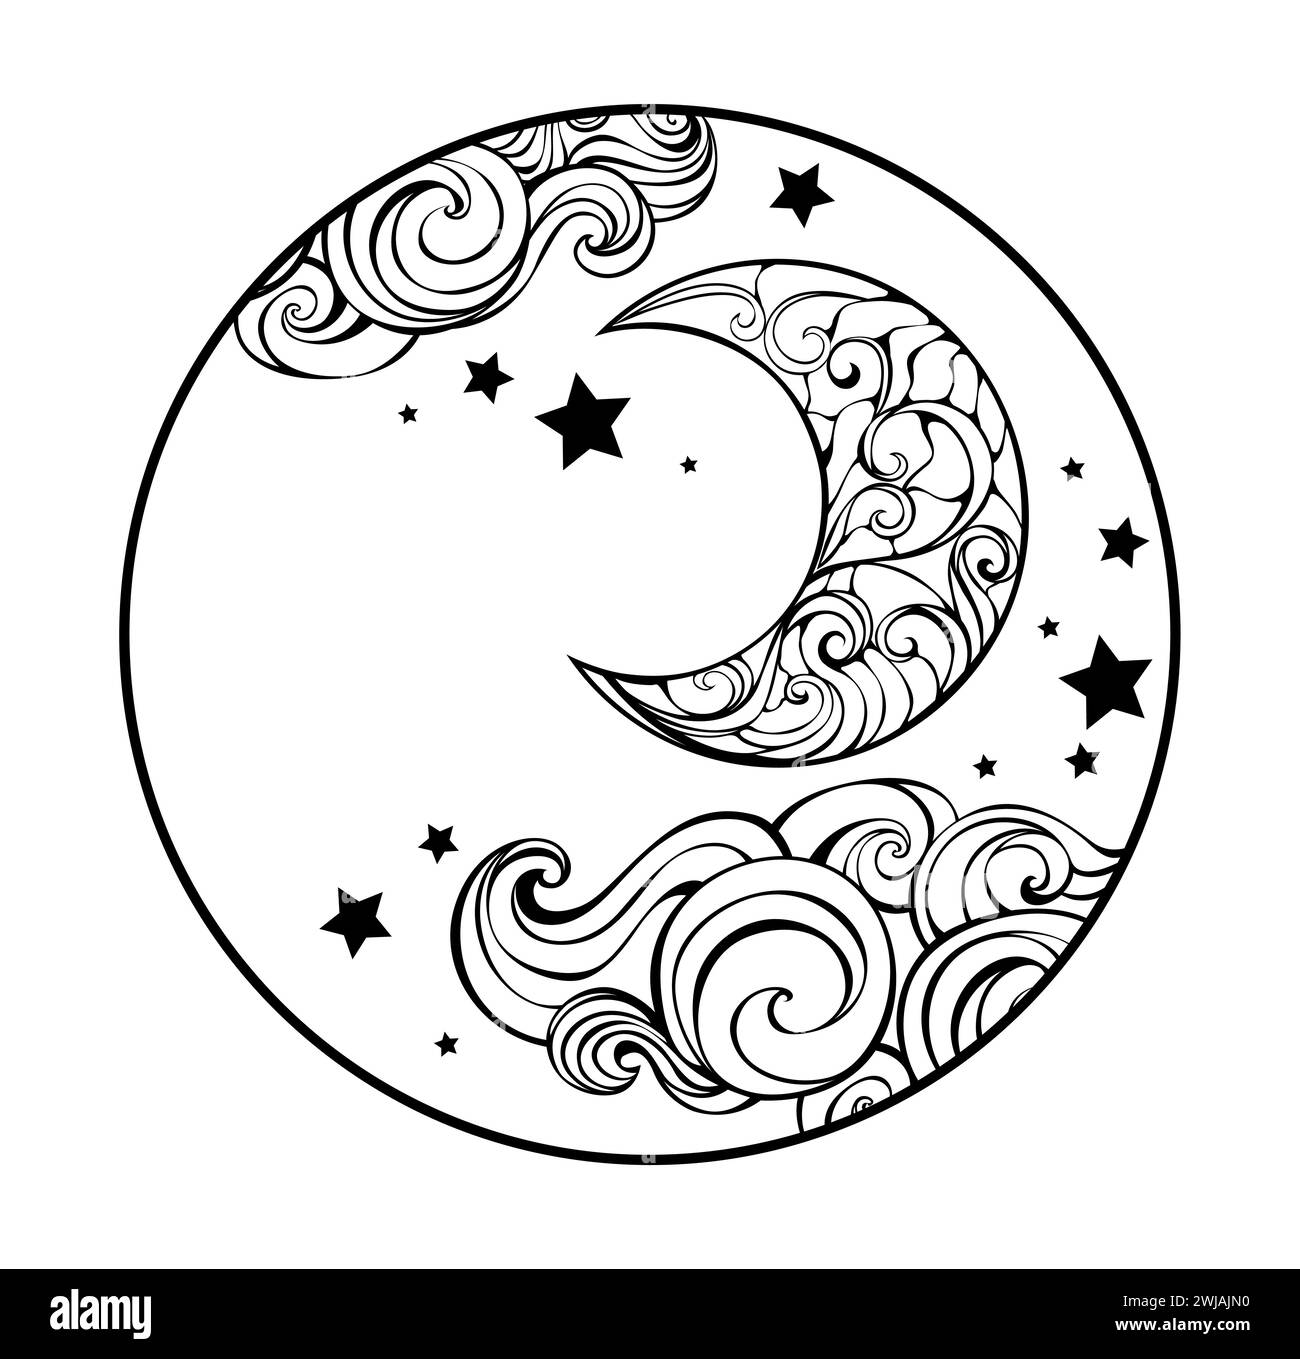 Round monogram with an artistically drawn crescent moon, clouds and stars on white background. Patterned crescent. Stock Vector